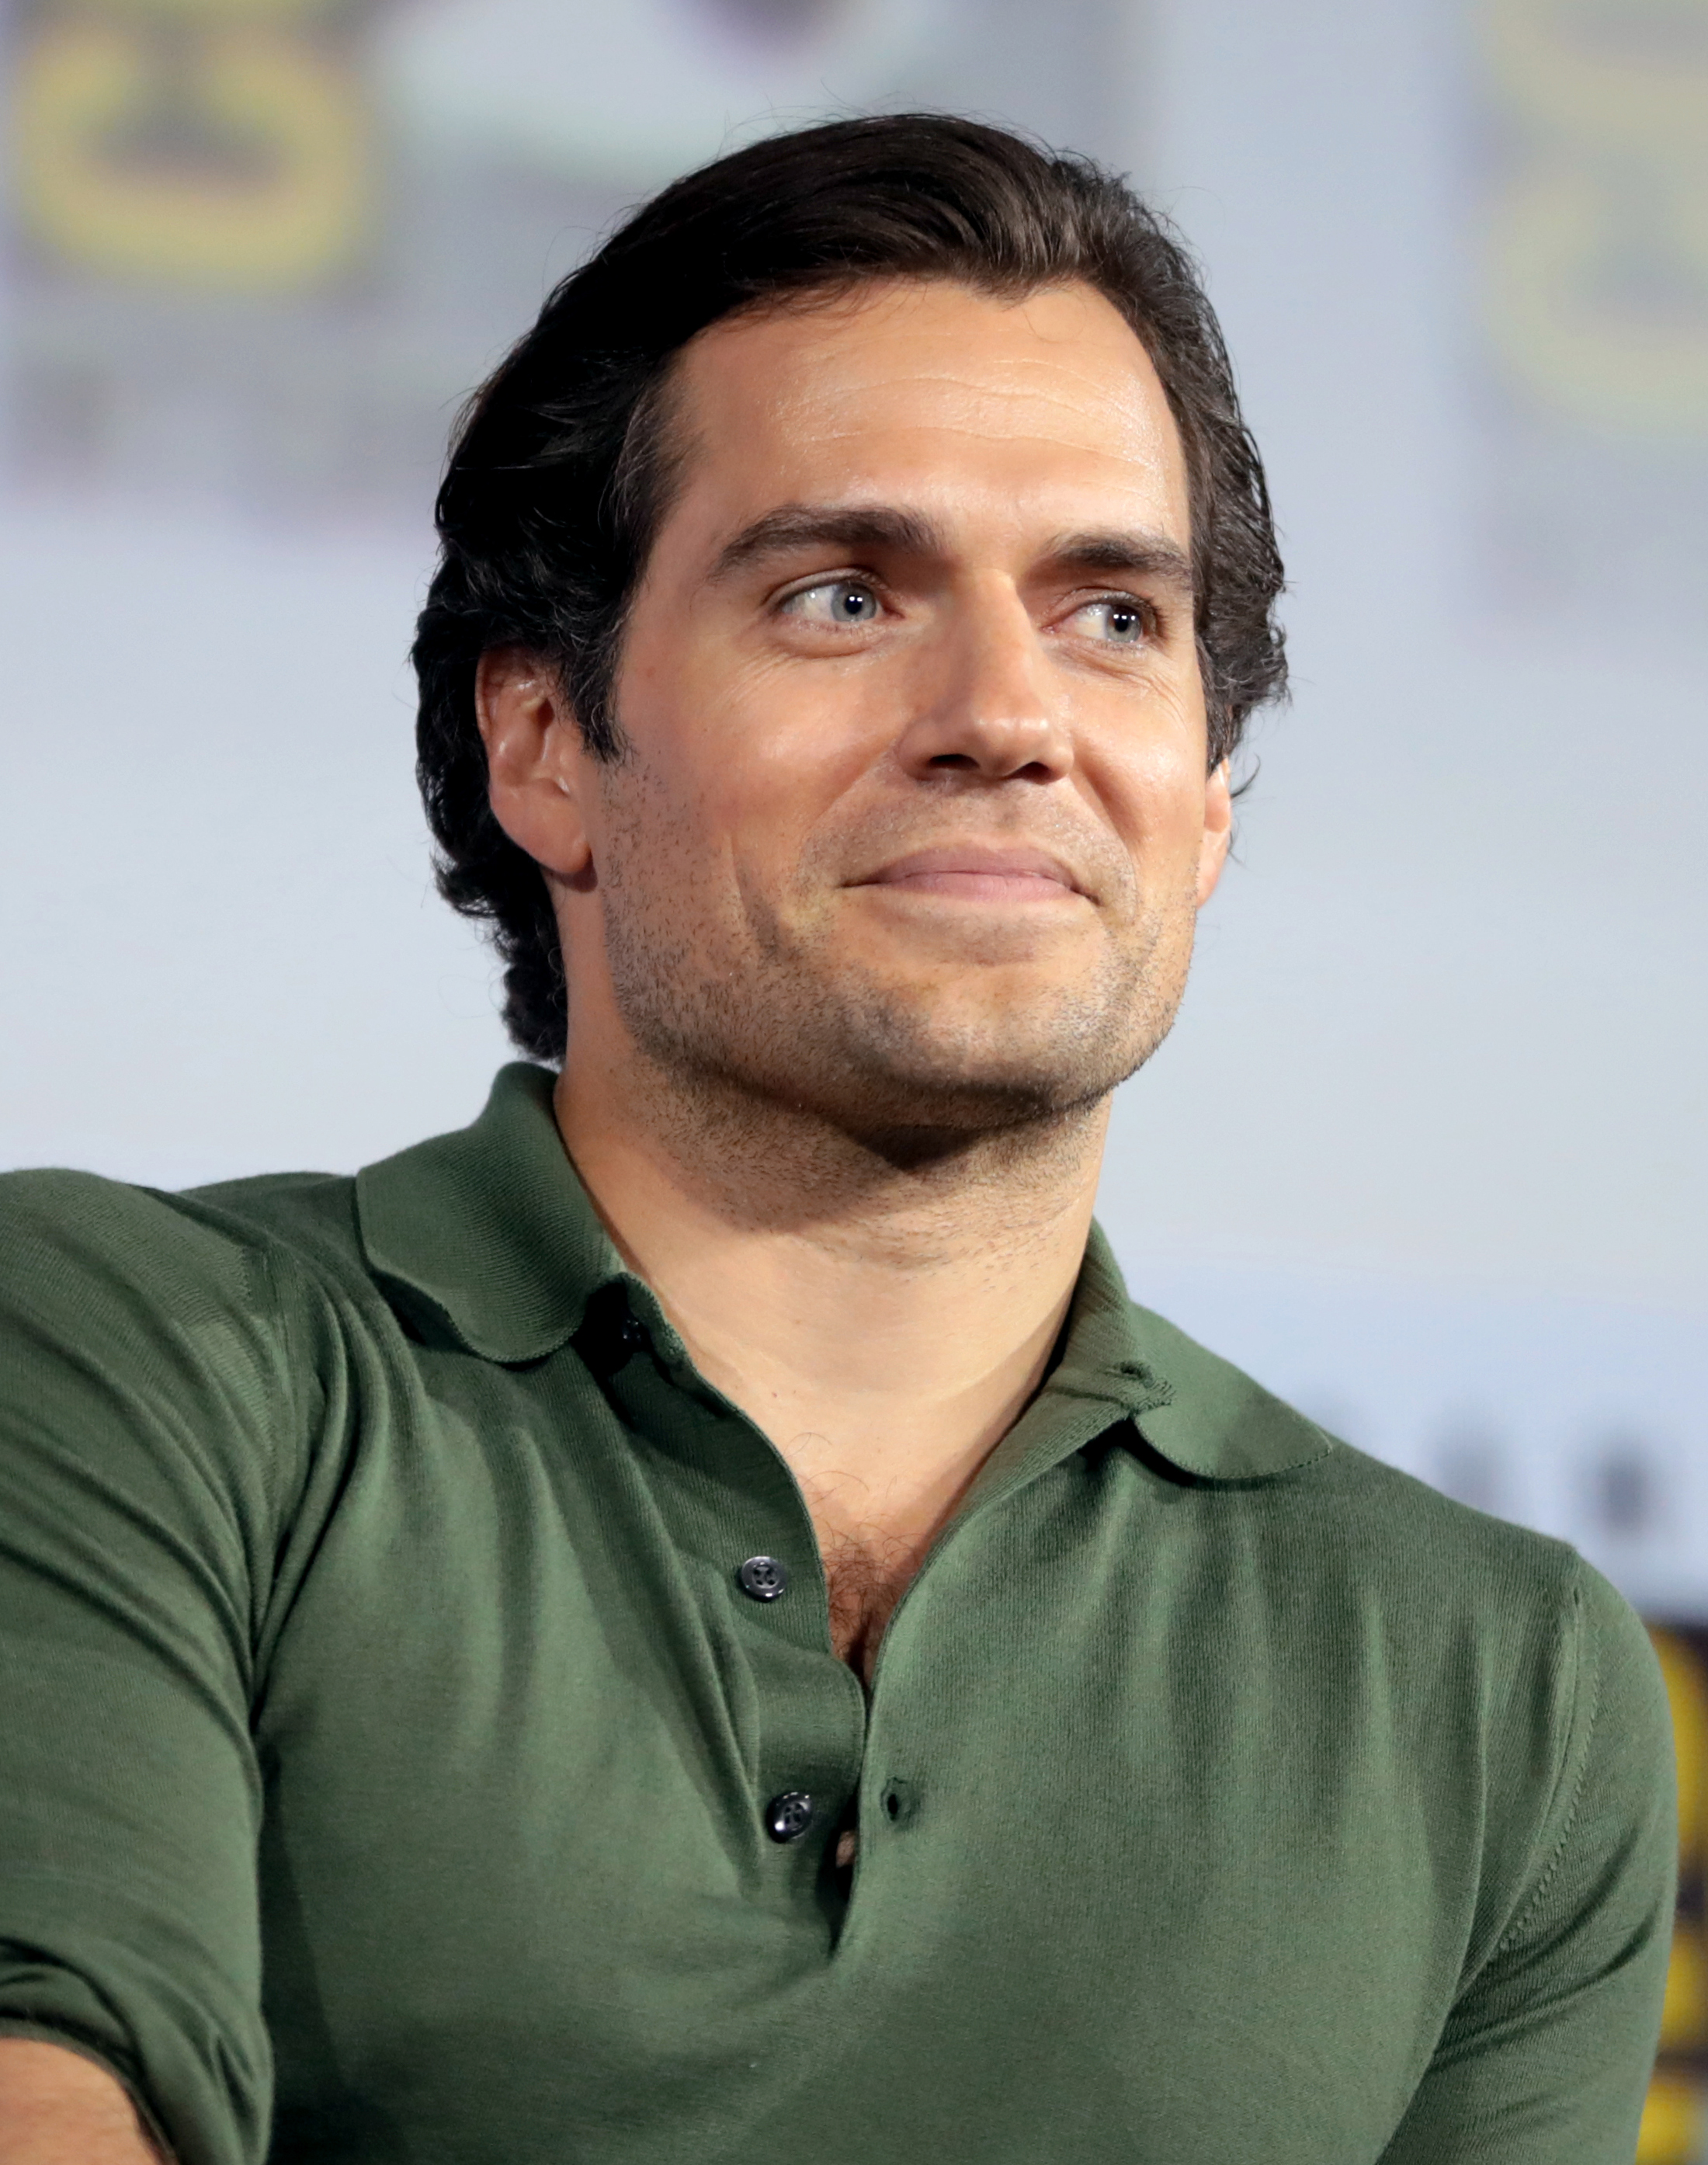 Henry Cavill announces he will not return as Superman in next film